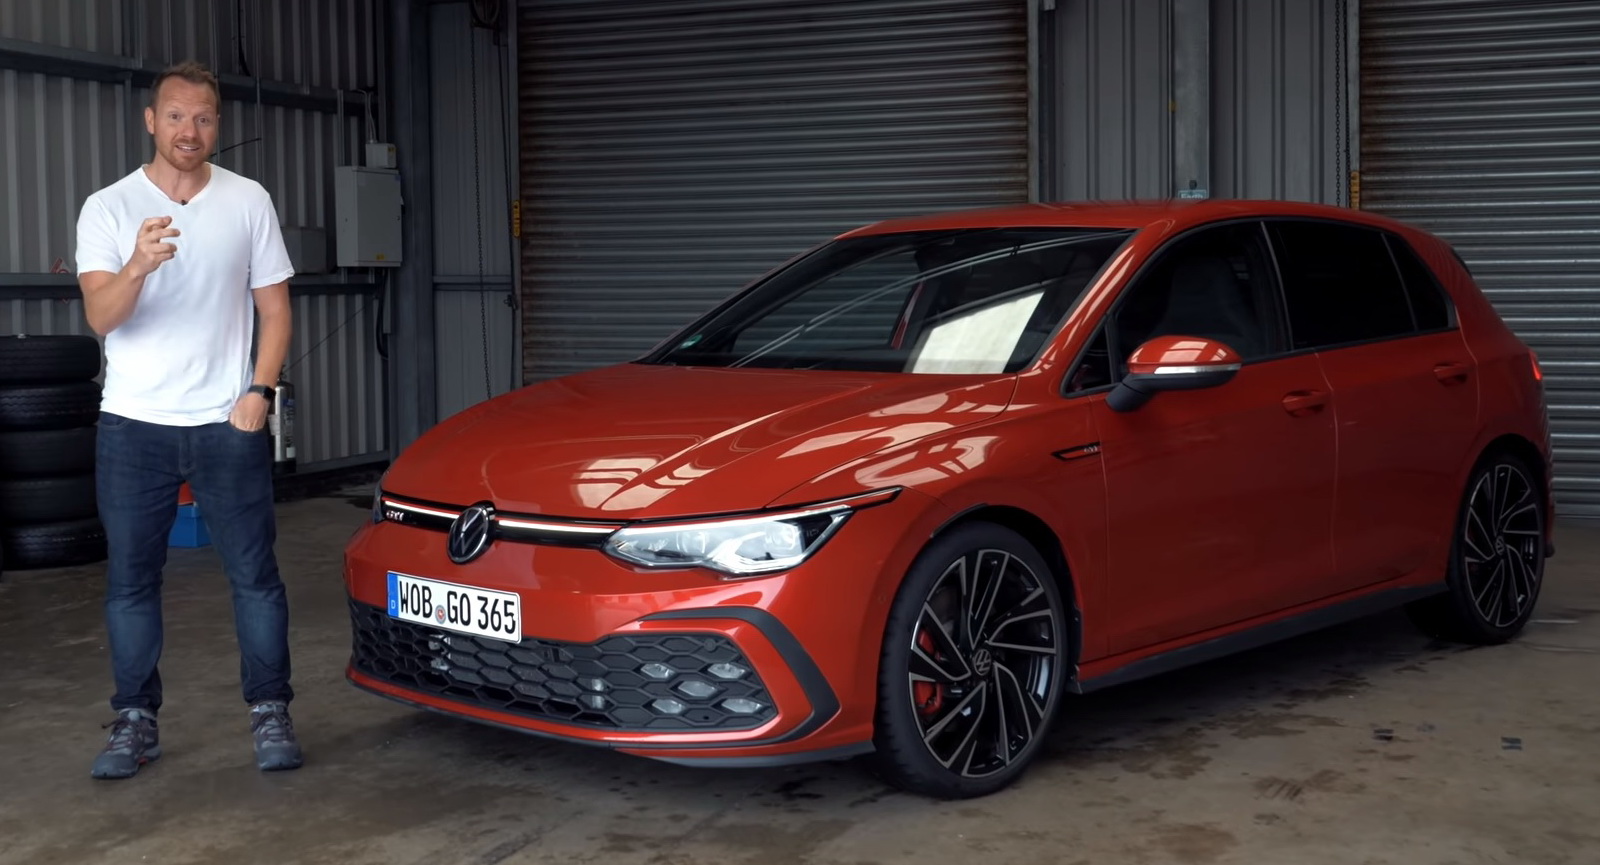 2021 VW Golf GTI: Time To Find Out If The New Hot Hatch Is ...